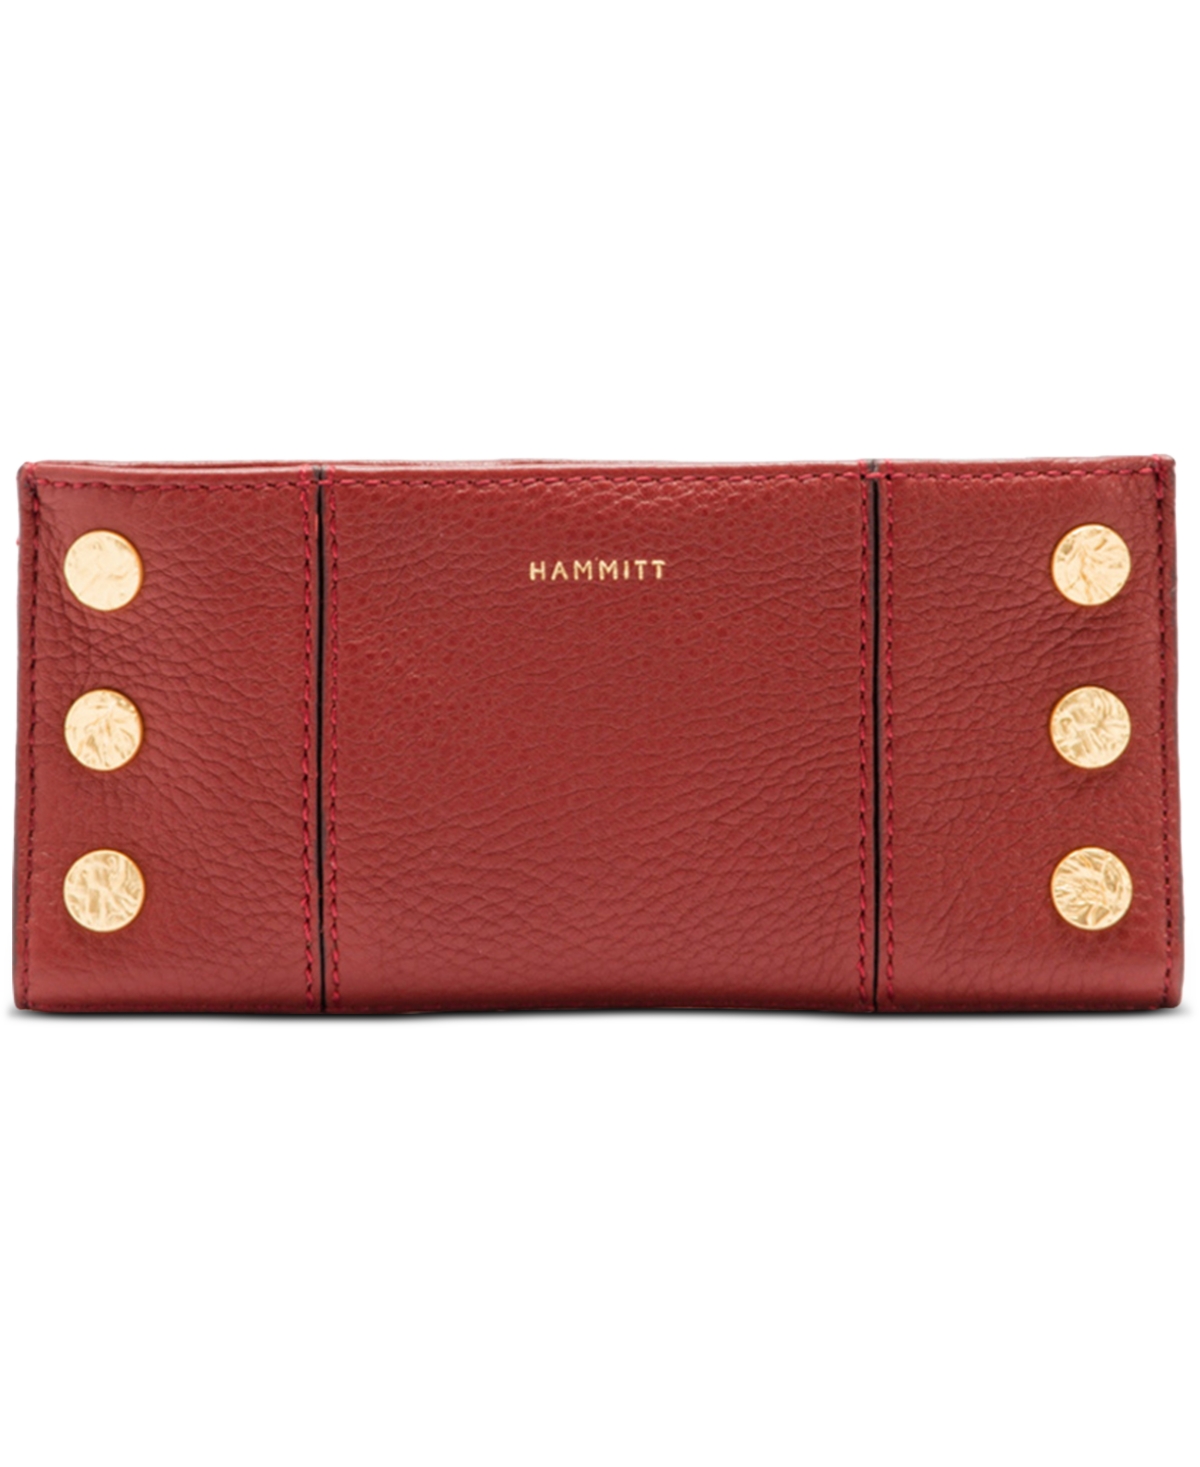 Hammitt 110 North Leather Wallet In Pom Red